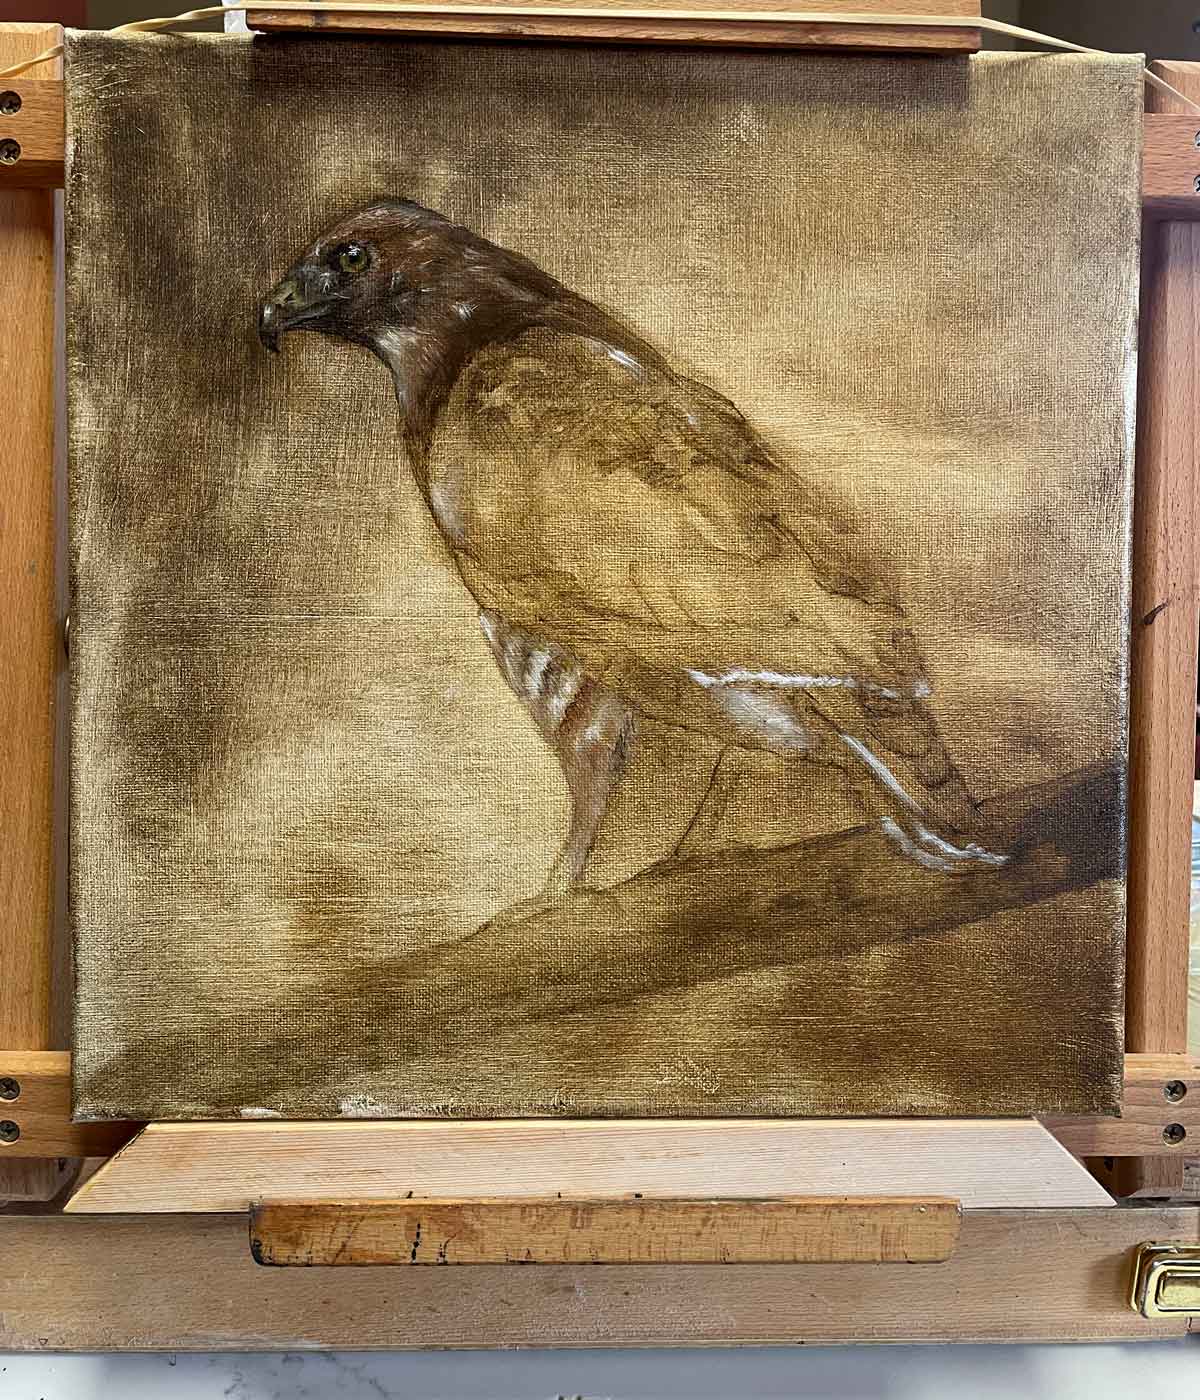 Broad-winged hawk on the easel 1/2024